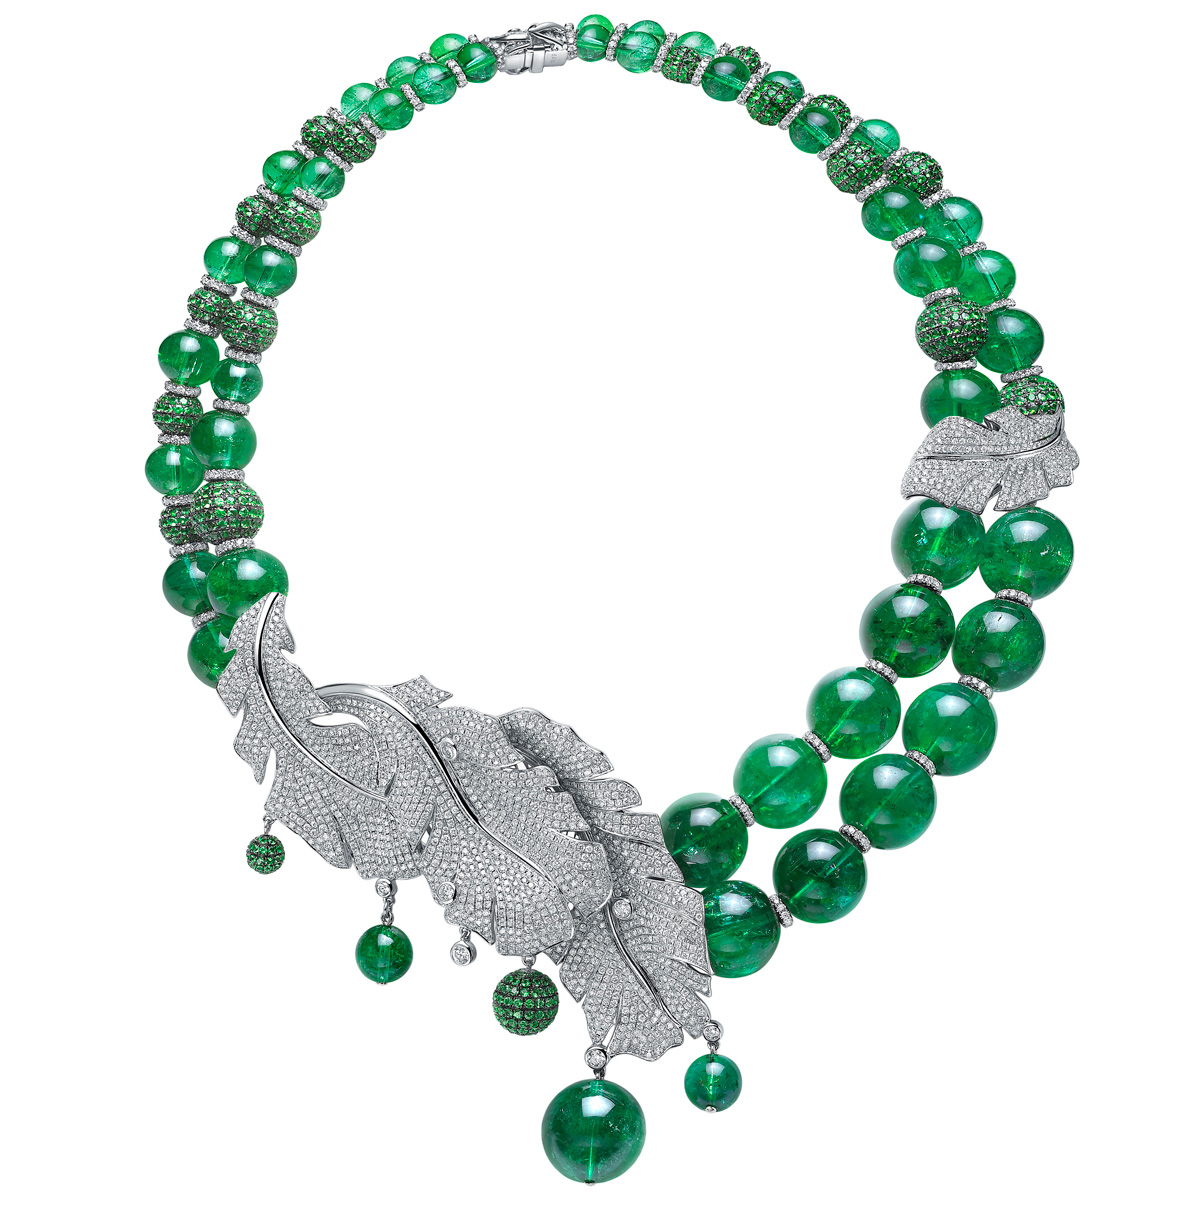 Fei Liu “Feather” necklace with diamonds and impressive beads of green tourmaline